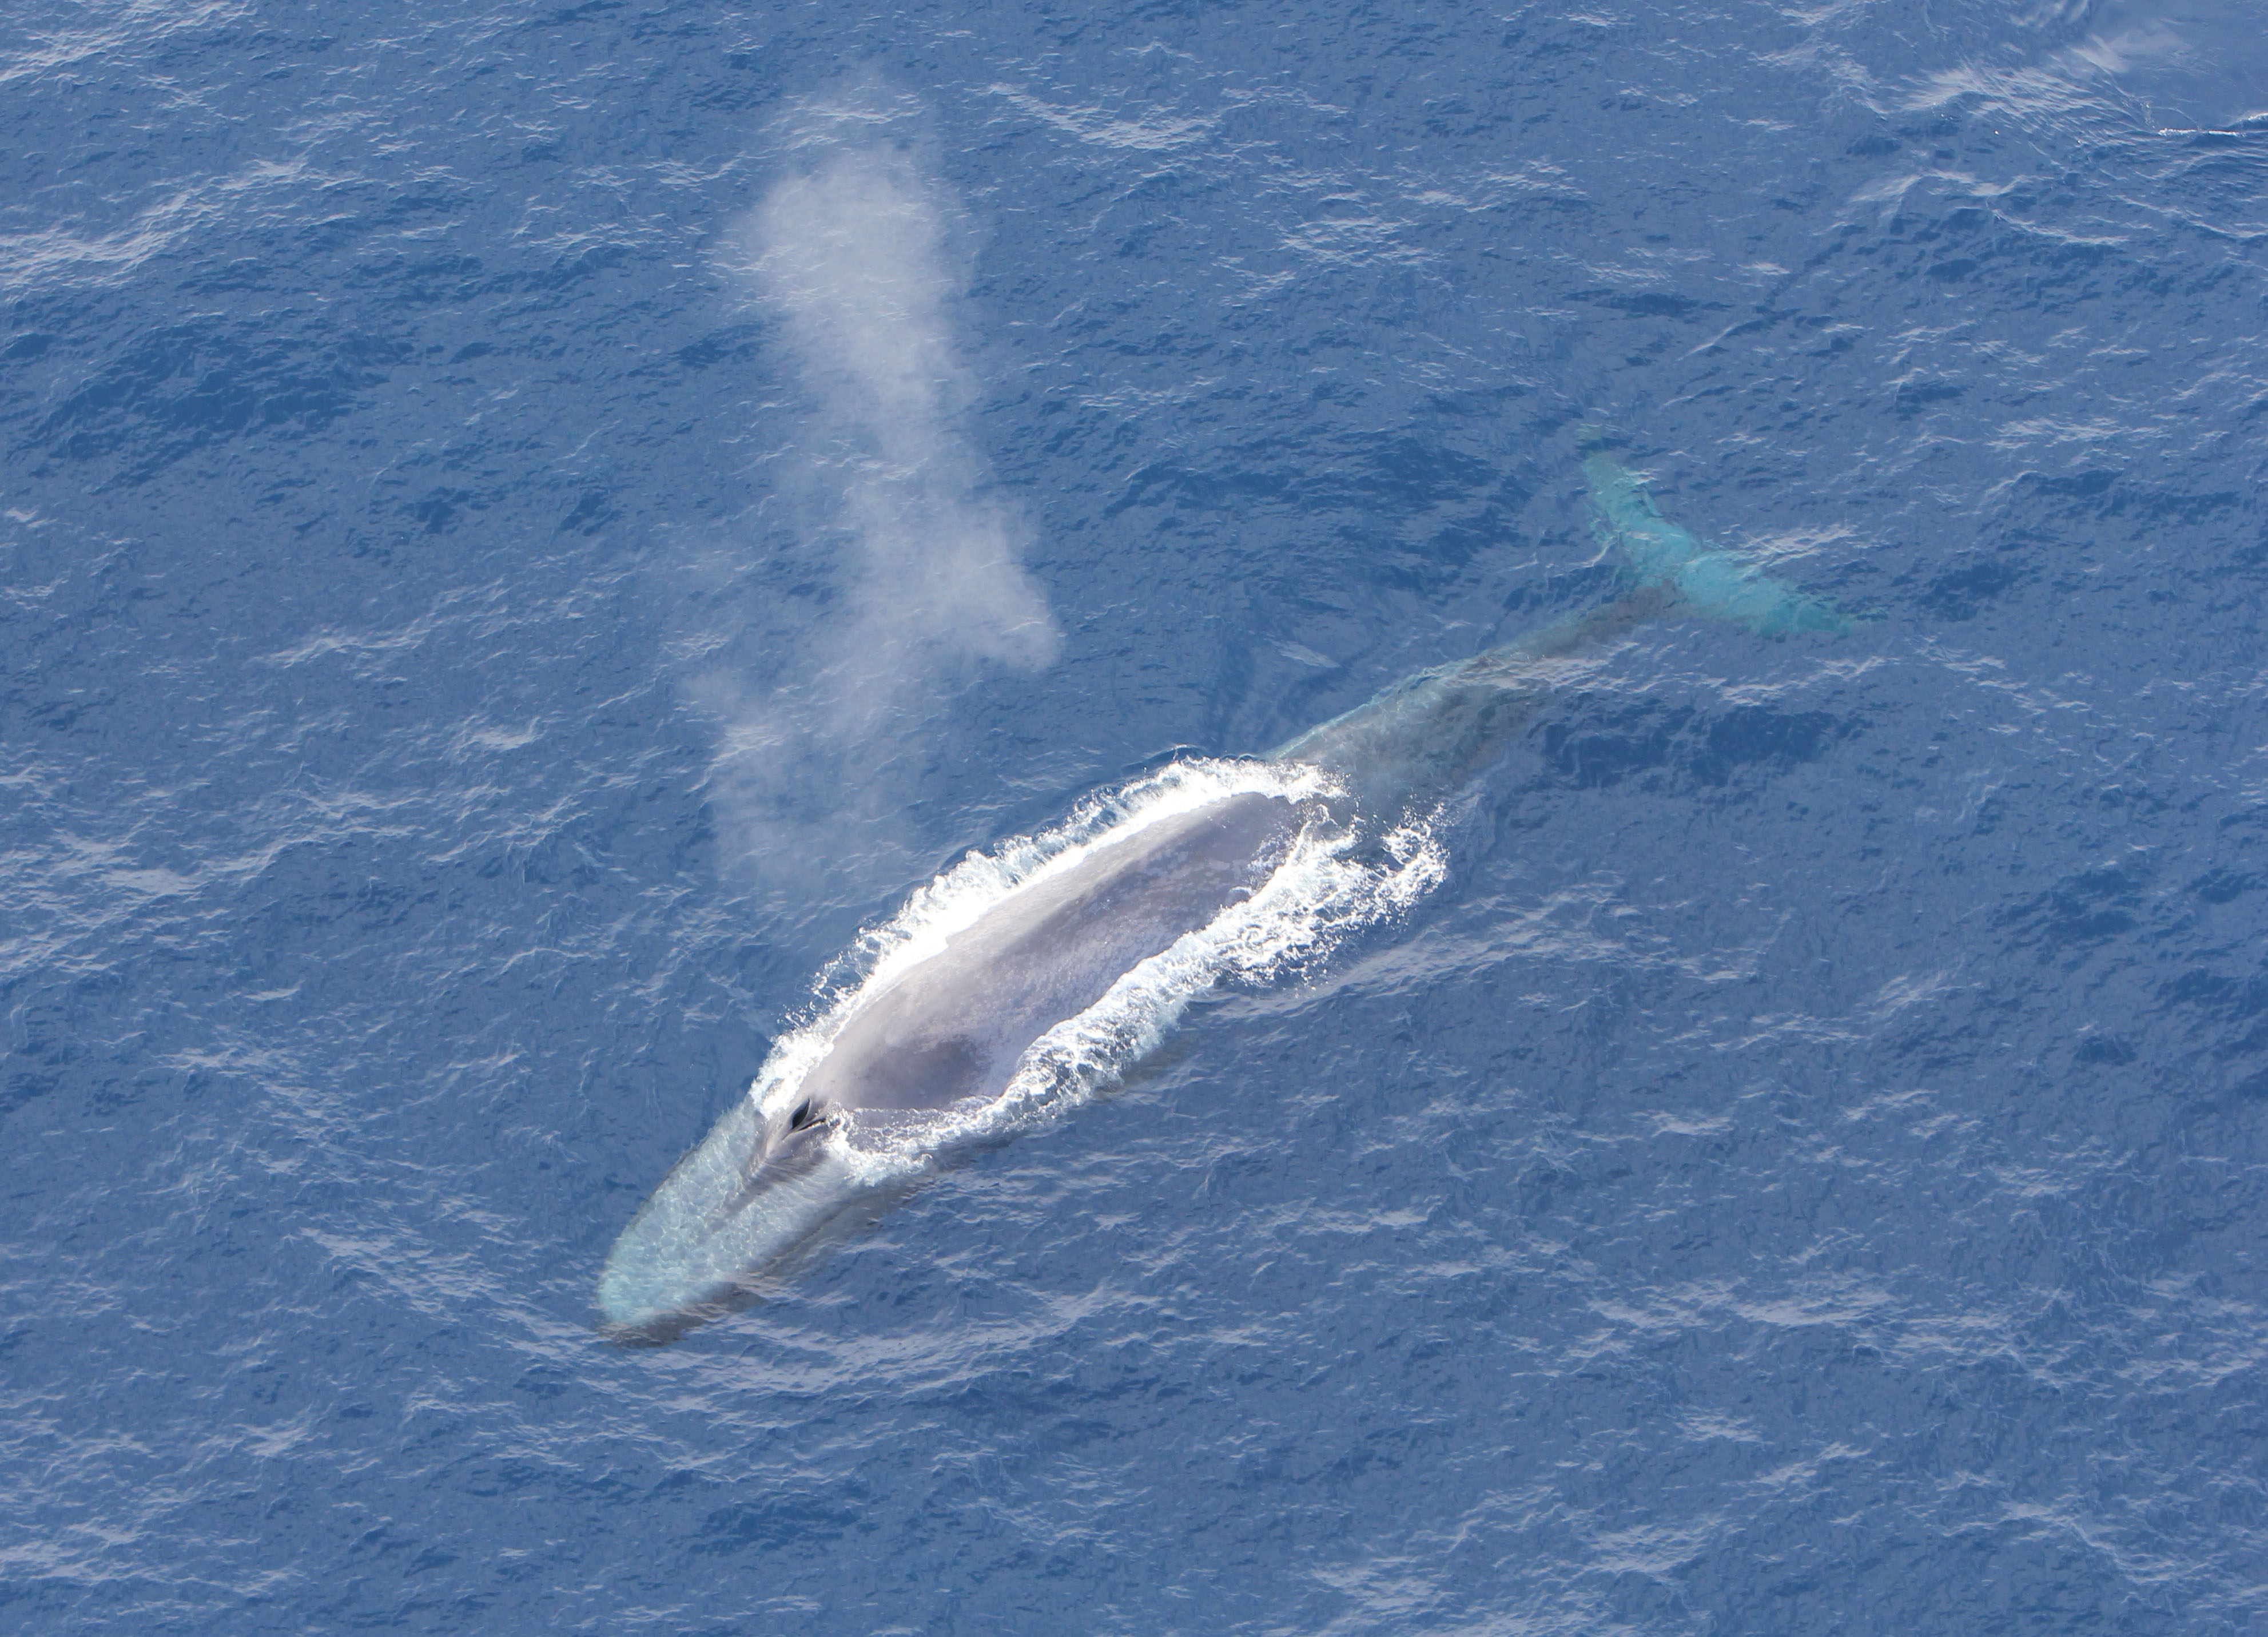 blue whale in the ocean